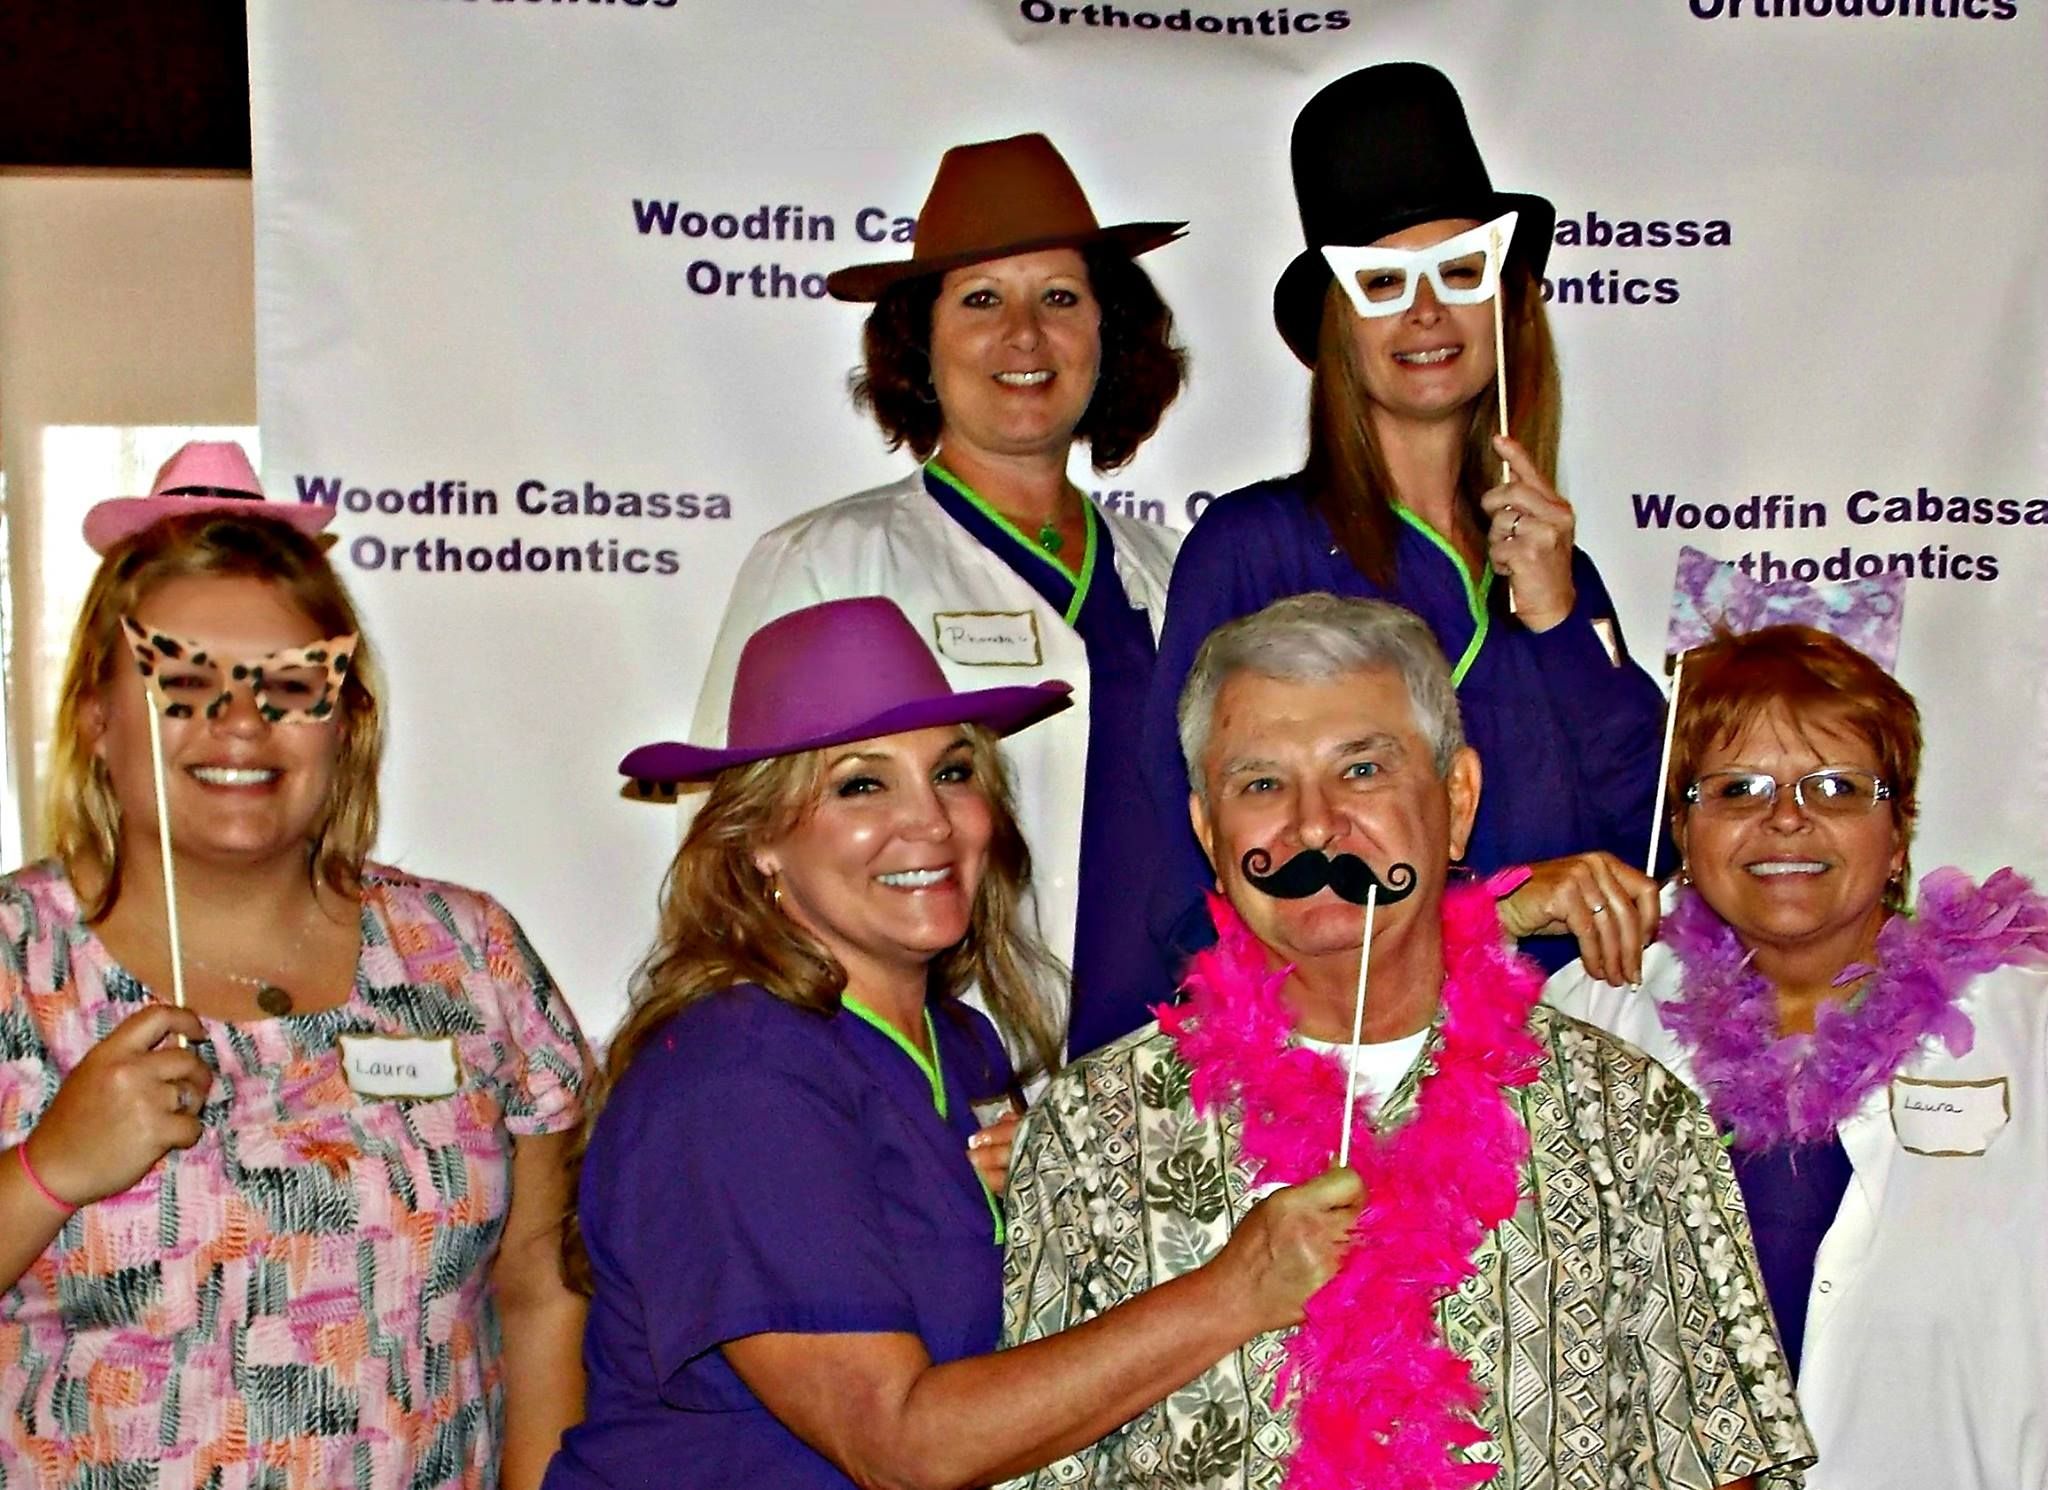 Dr. Lance Washburn and staff with photobooth props